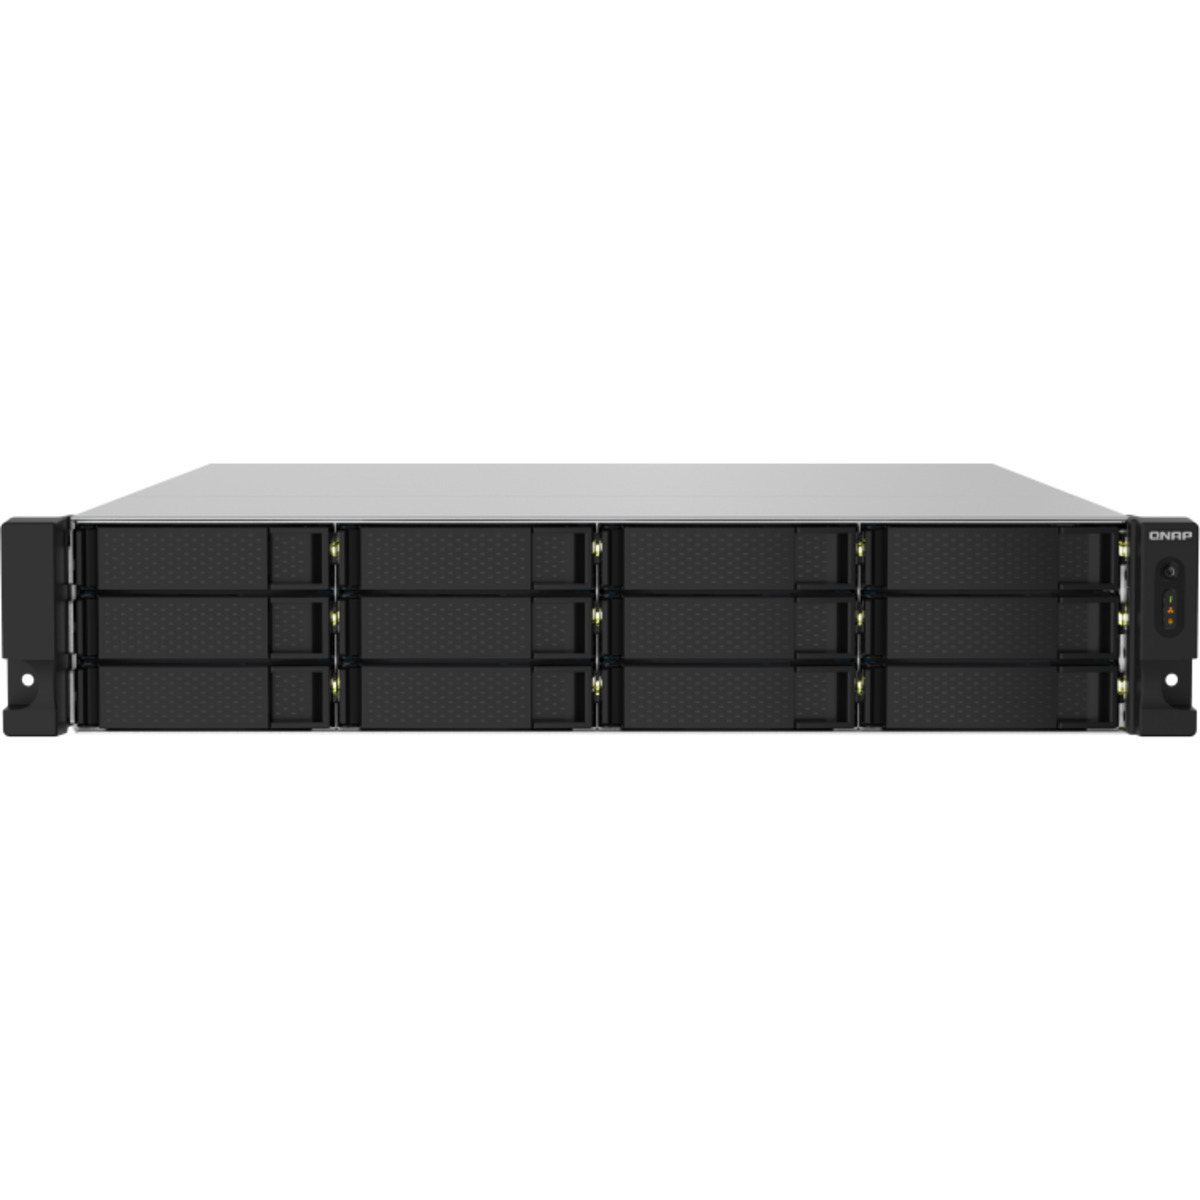 QNAP TS-1232PXU-RP 64tb 12-Bay RackMount Personal / Basic Home / Small Office NAS - Network Attached Storage Device 8x8tb Western Digital Ultrastar DC HC320 HUS728T8TALE6L4 3.5 7200rpm SATA 6Gb/s HDD ENTERPRISE Class Drives Installed - Burn-In Tested - FREE RAM UPGRADE TS-1232PXU-RP